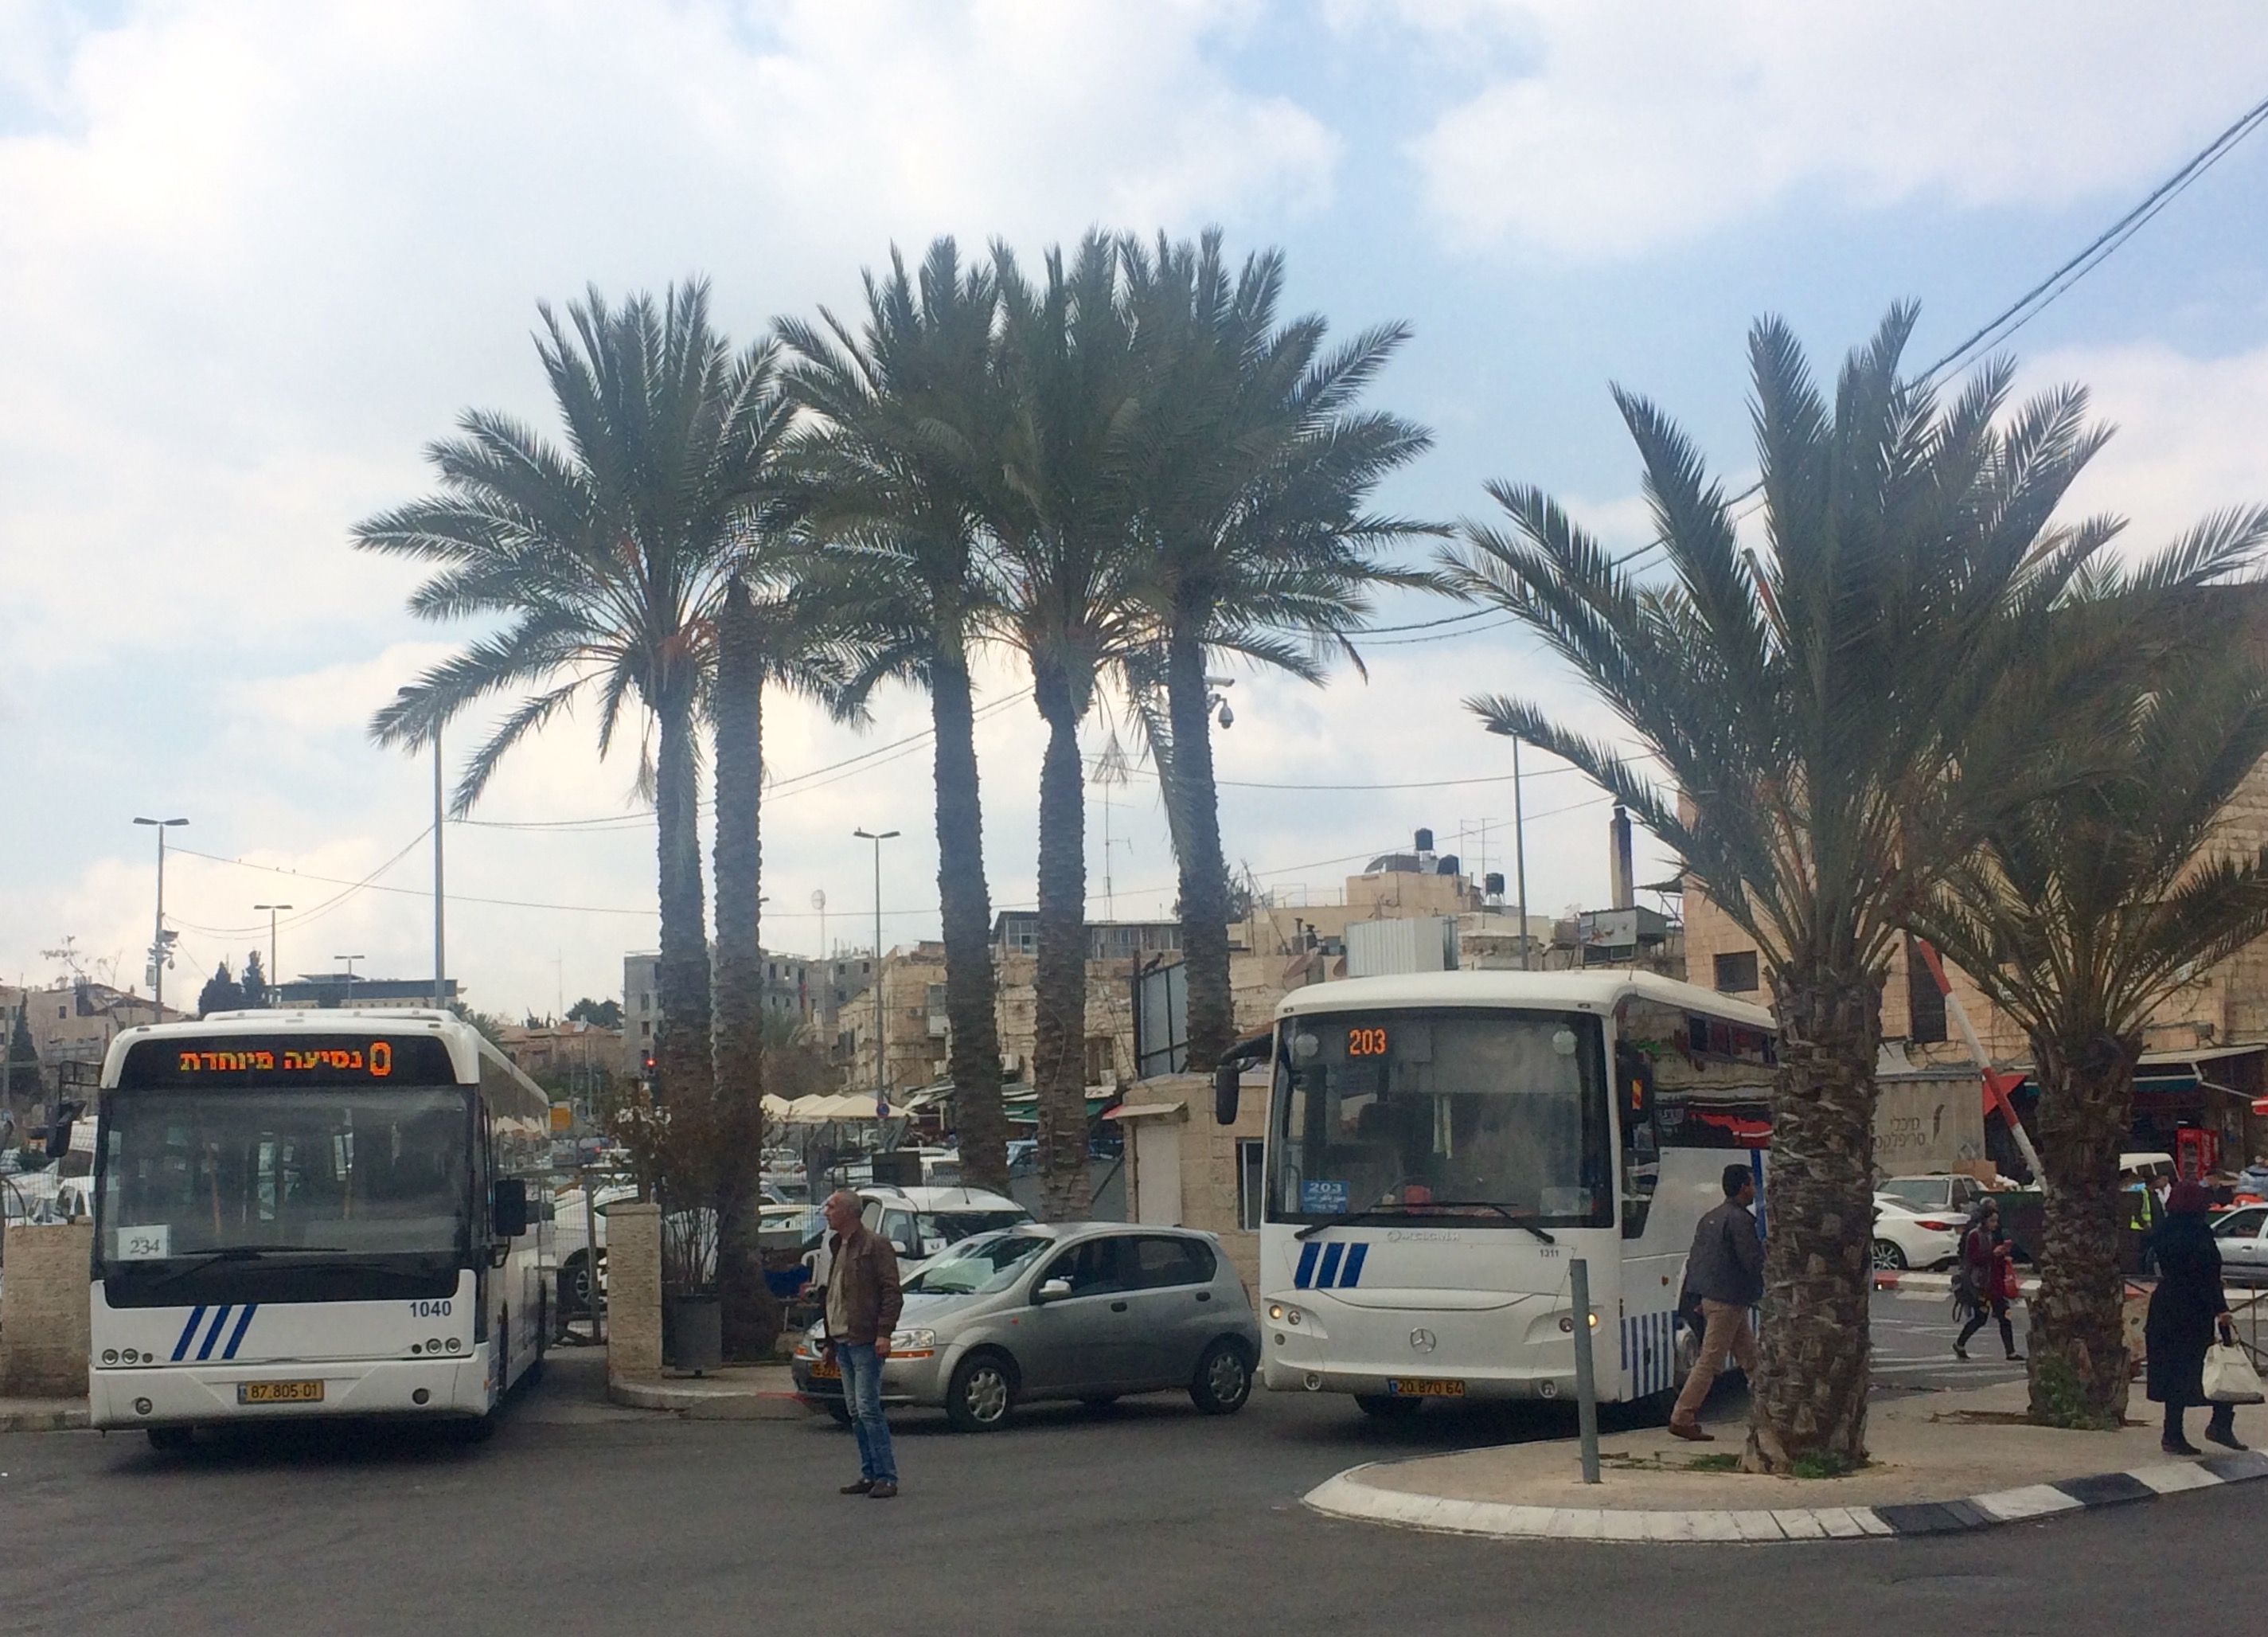 One of three disparate parts of Palestinian East Jerusalem's "central" bus stations. Image by Miriam Berger, 2017.